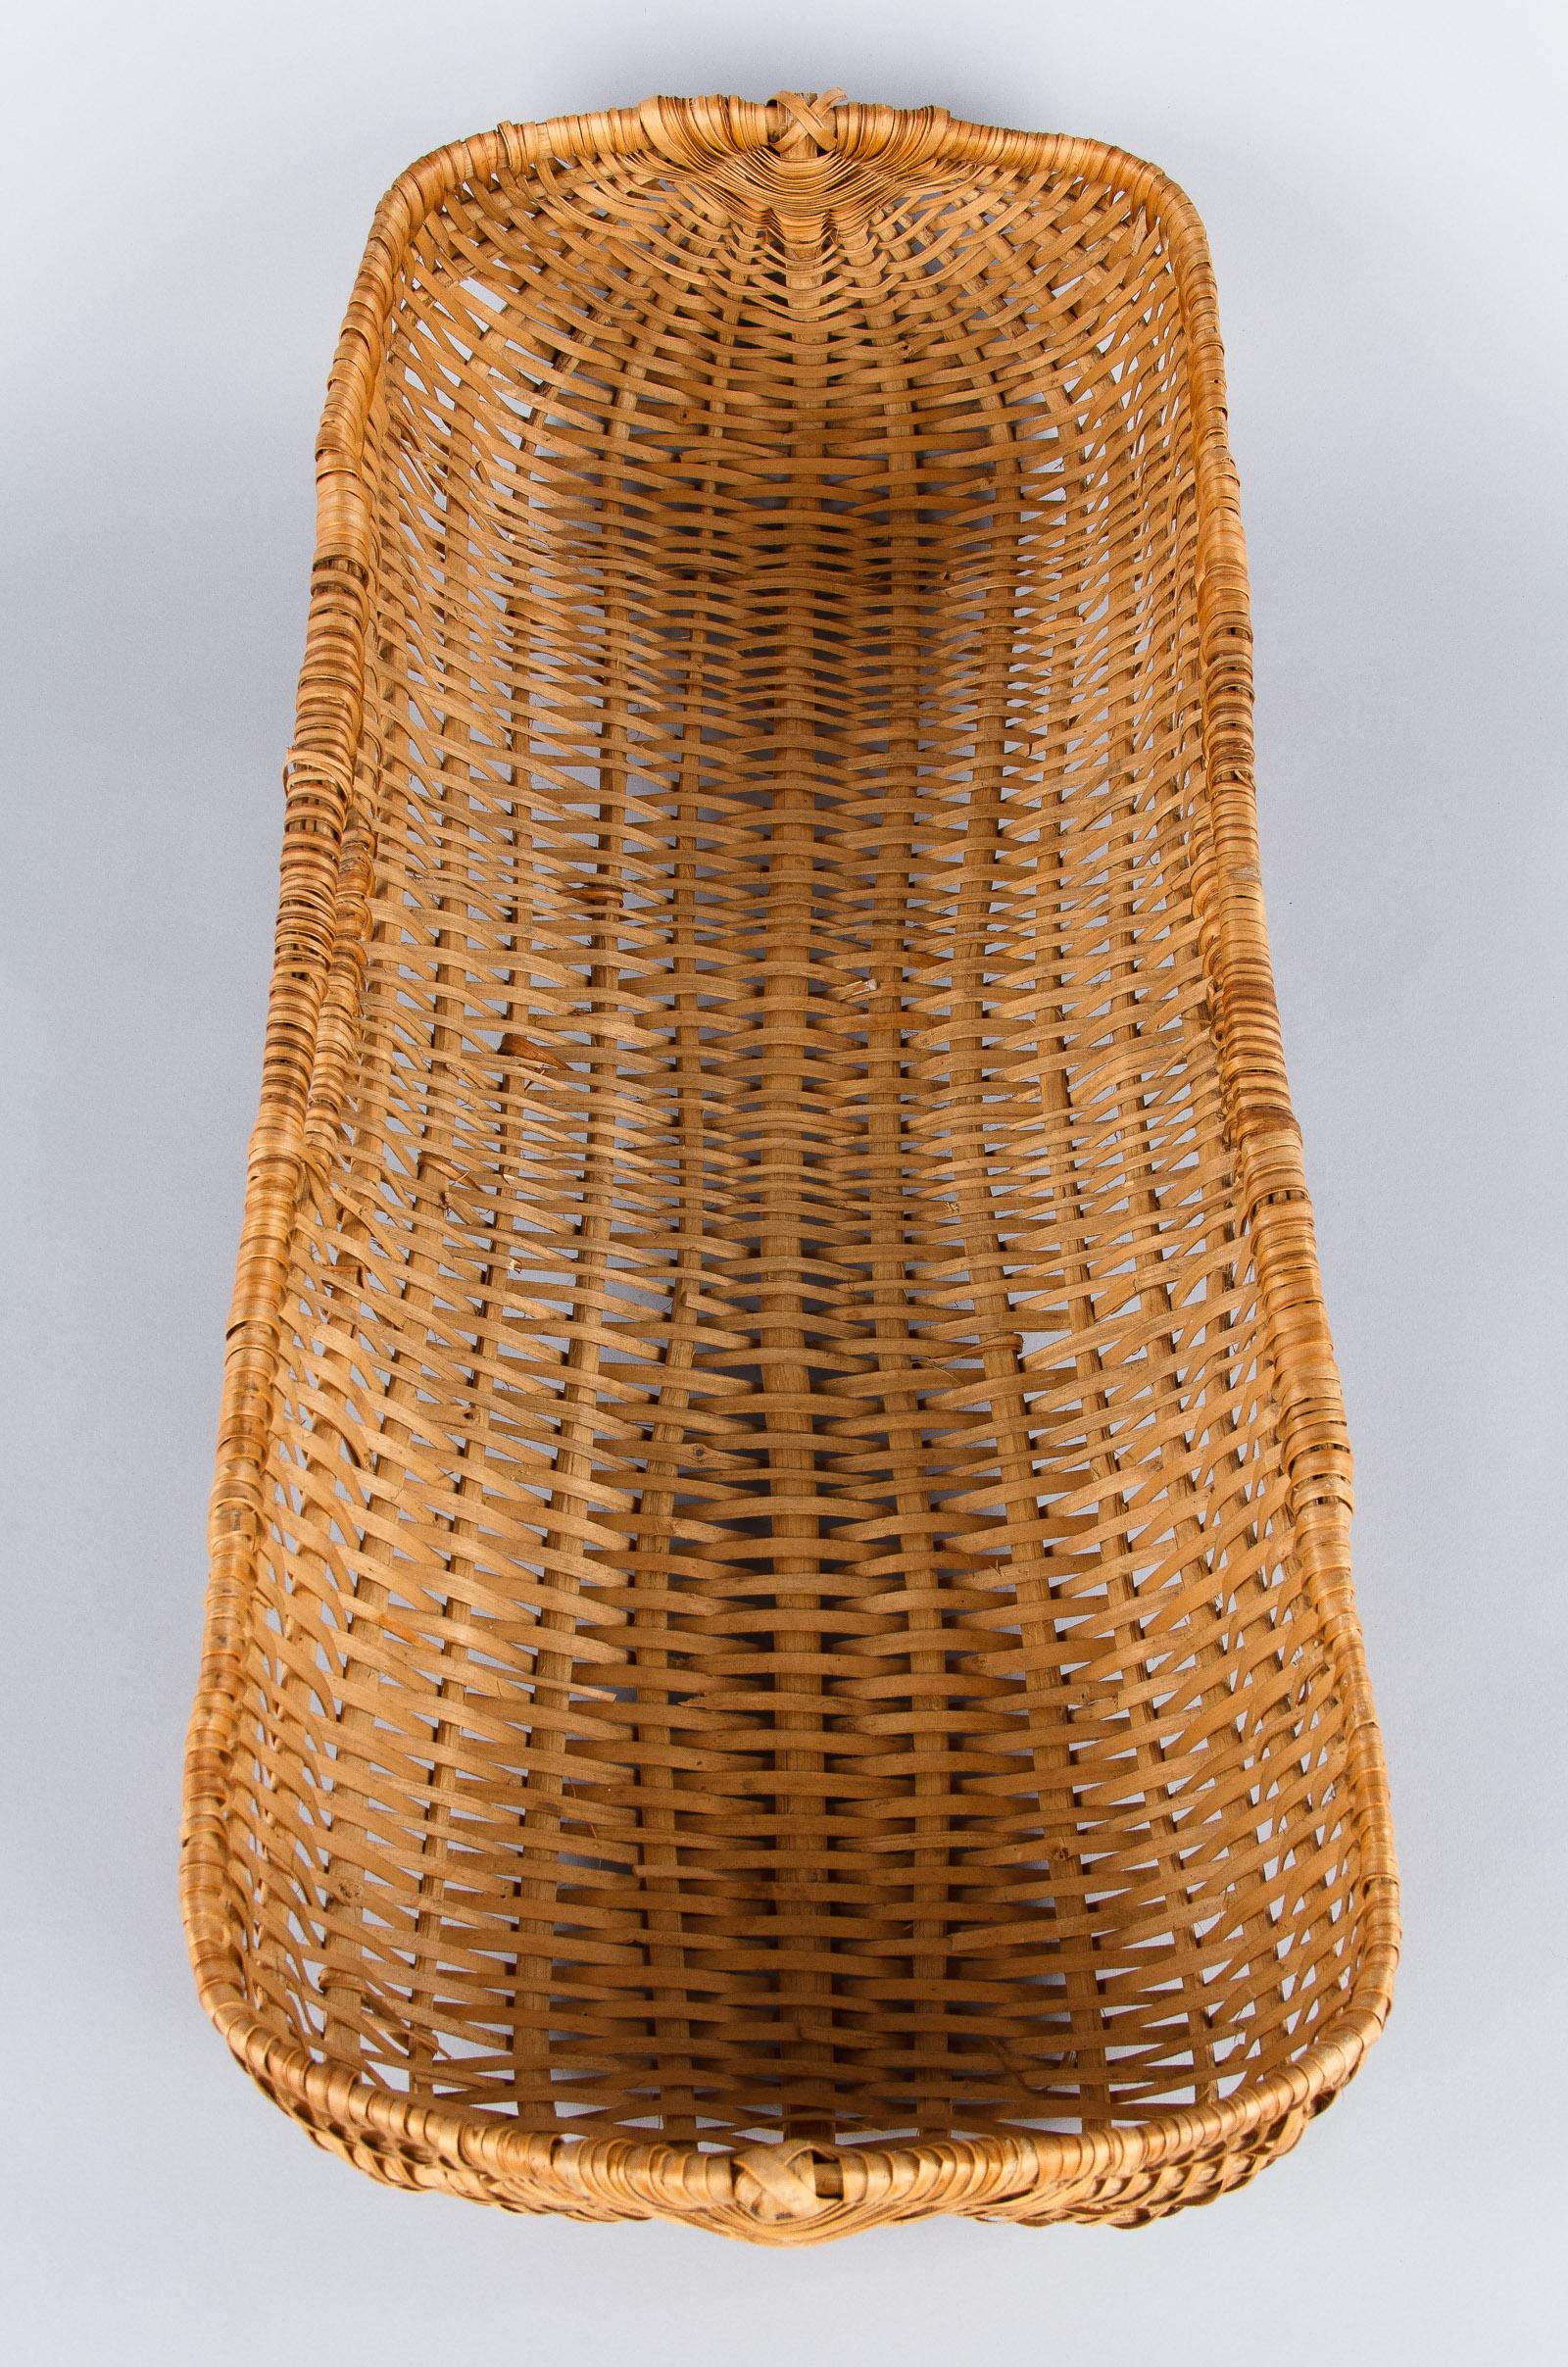 An unusual flat wicker basket with 2 side handles from the Auvergne region in central France. This type of basket was used in French farmers' markets to display fruits, vegetables or flowers.